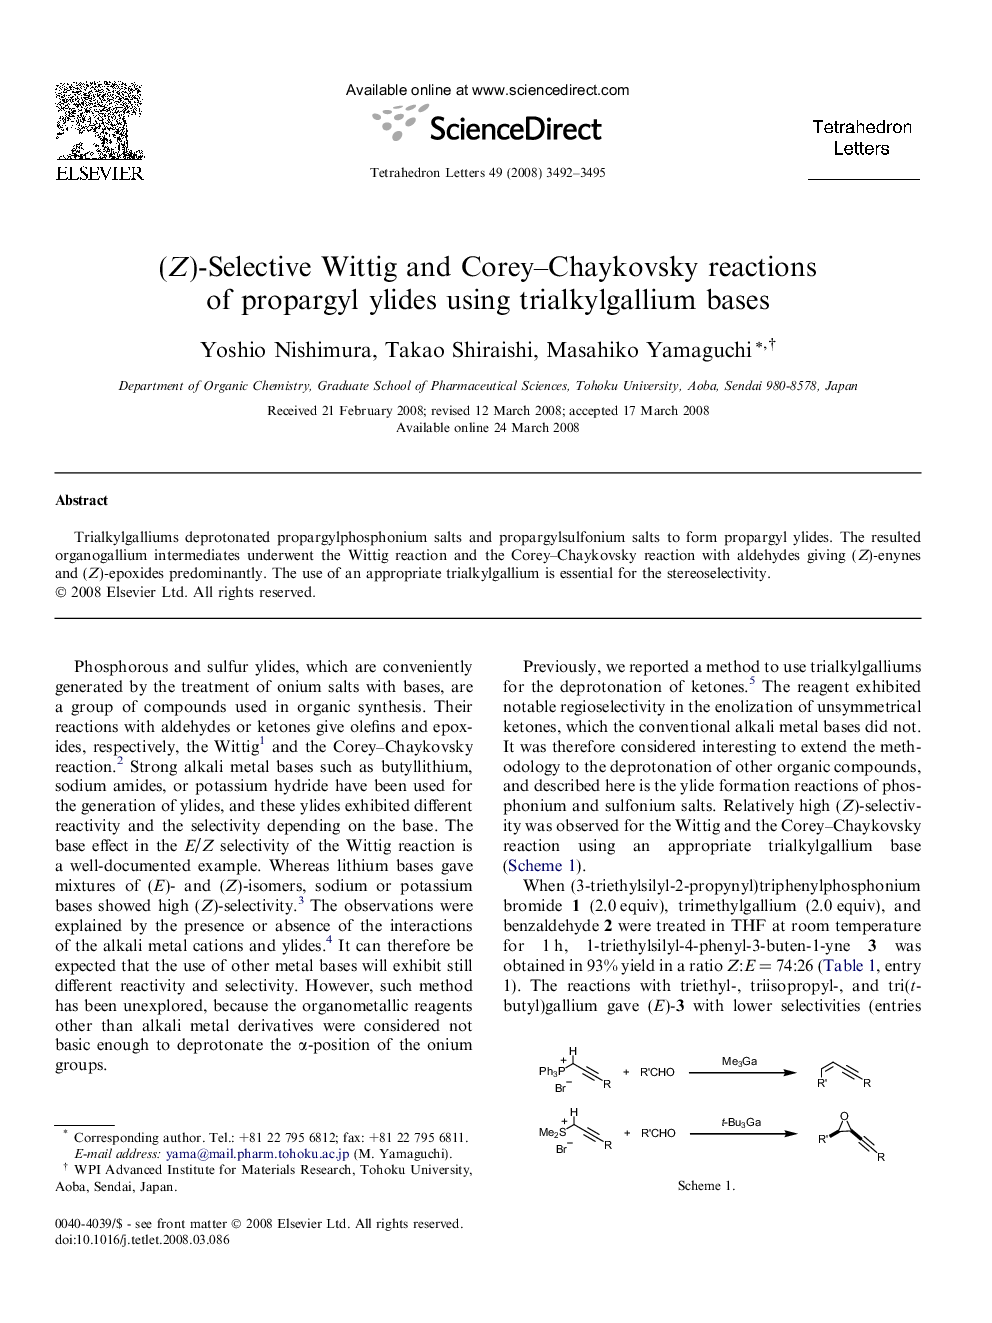 (Z)-Selective Wittig and Corey-Chaykovsky reactions of propargyl ylides using trialkylgallium bases